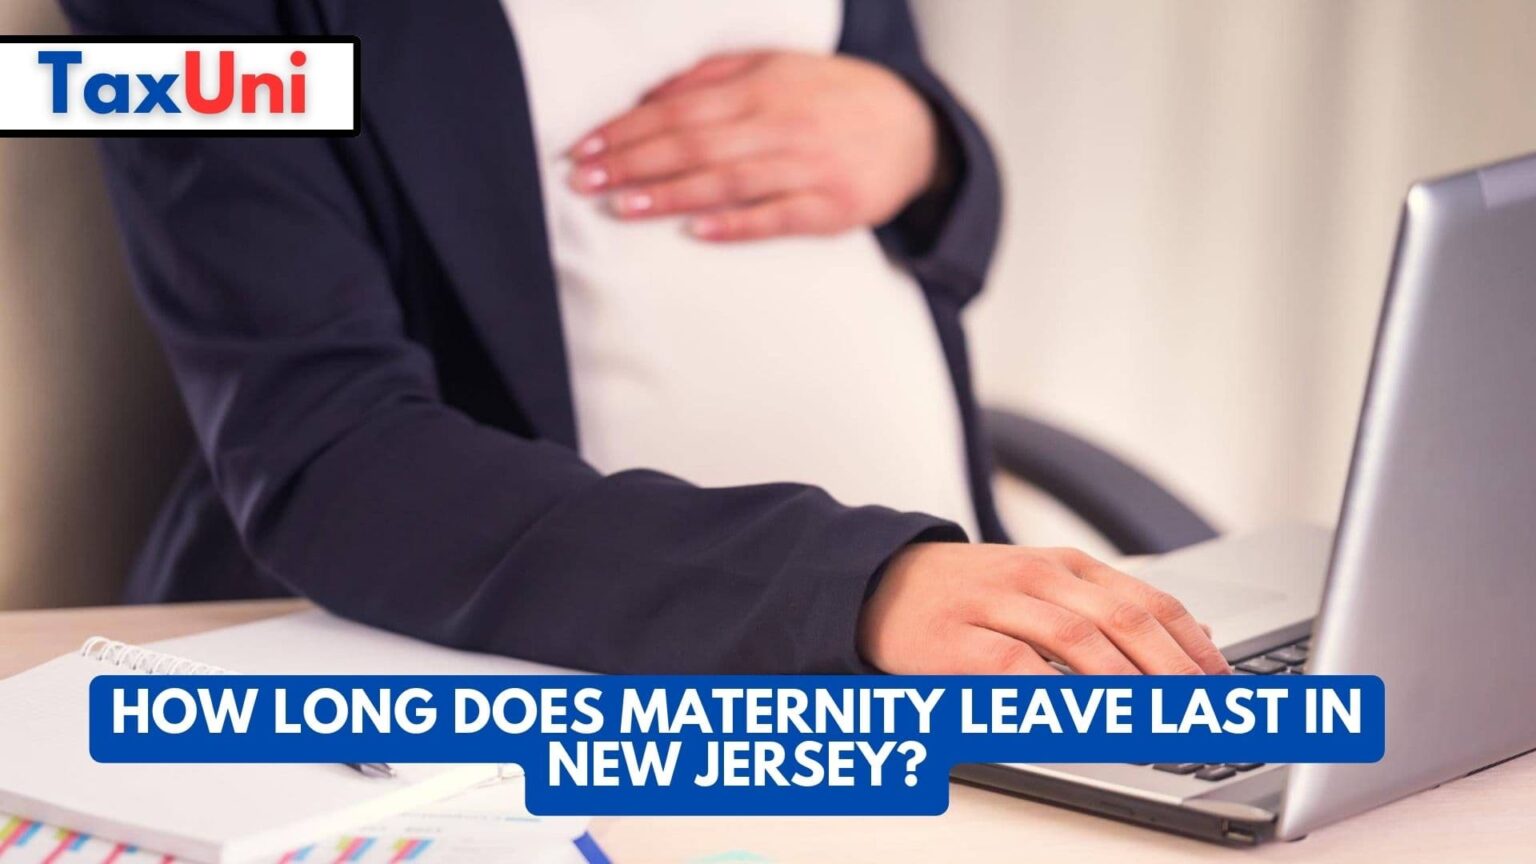 How Long Does Maternity Leave Last in New Jersey?